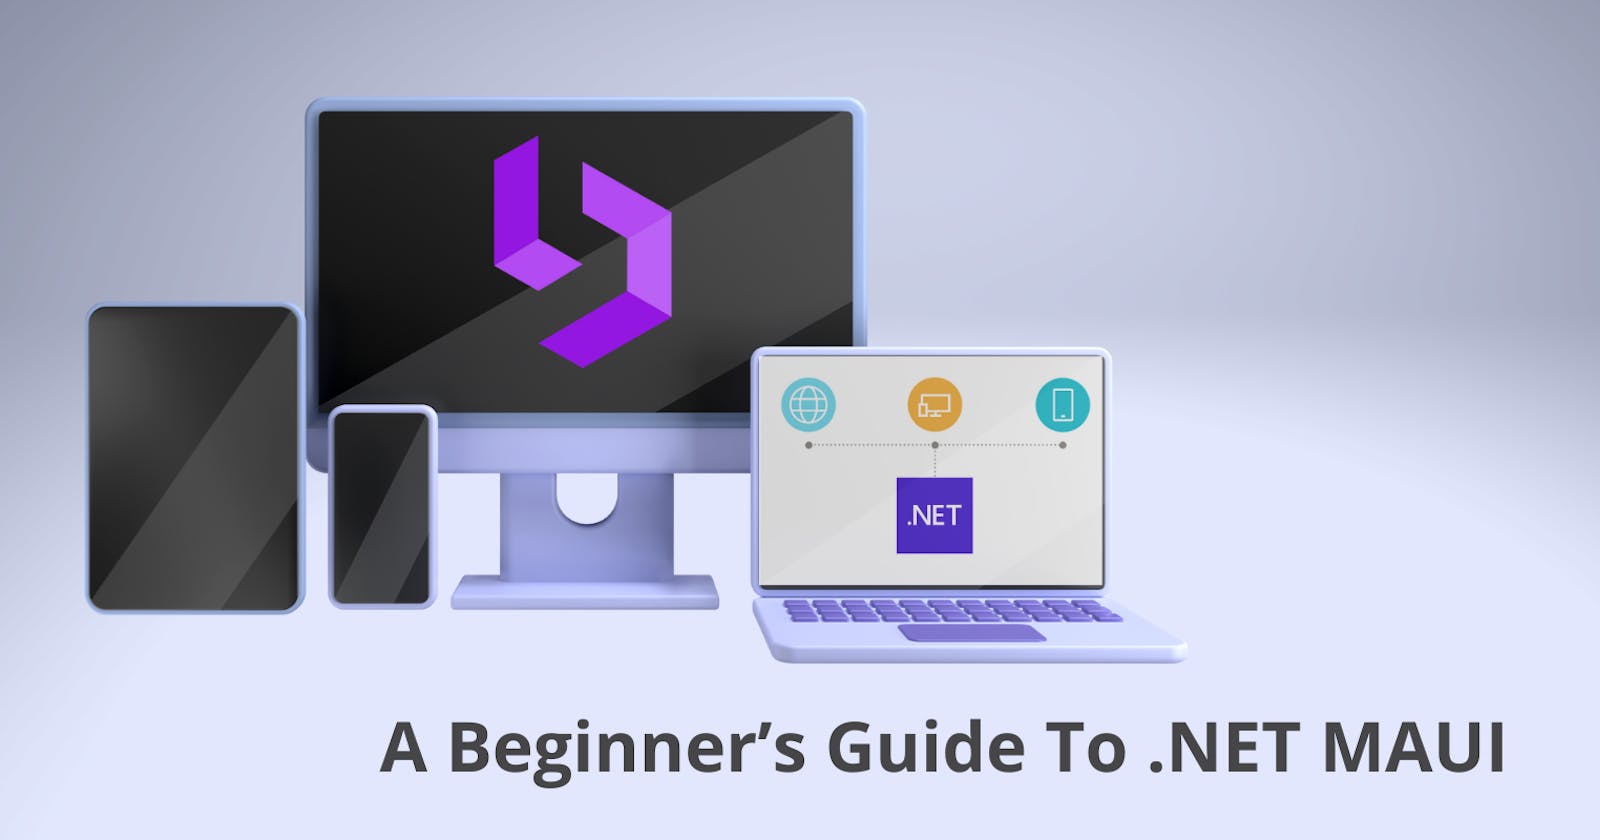 A Beginner's Guide To .NET MAUI